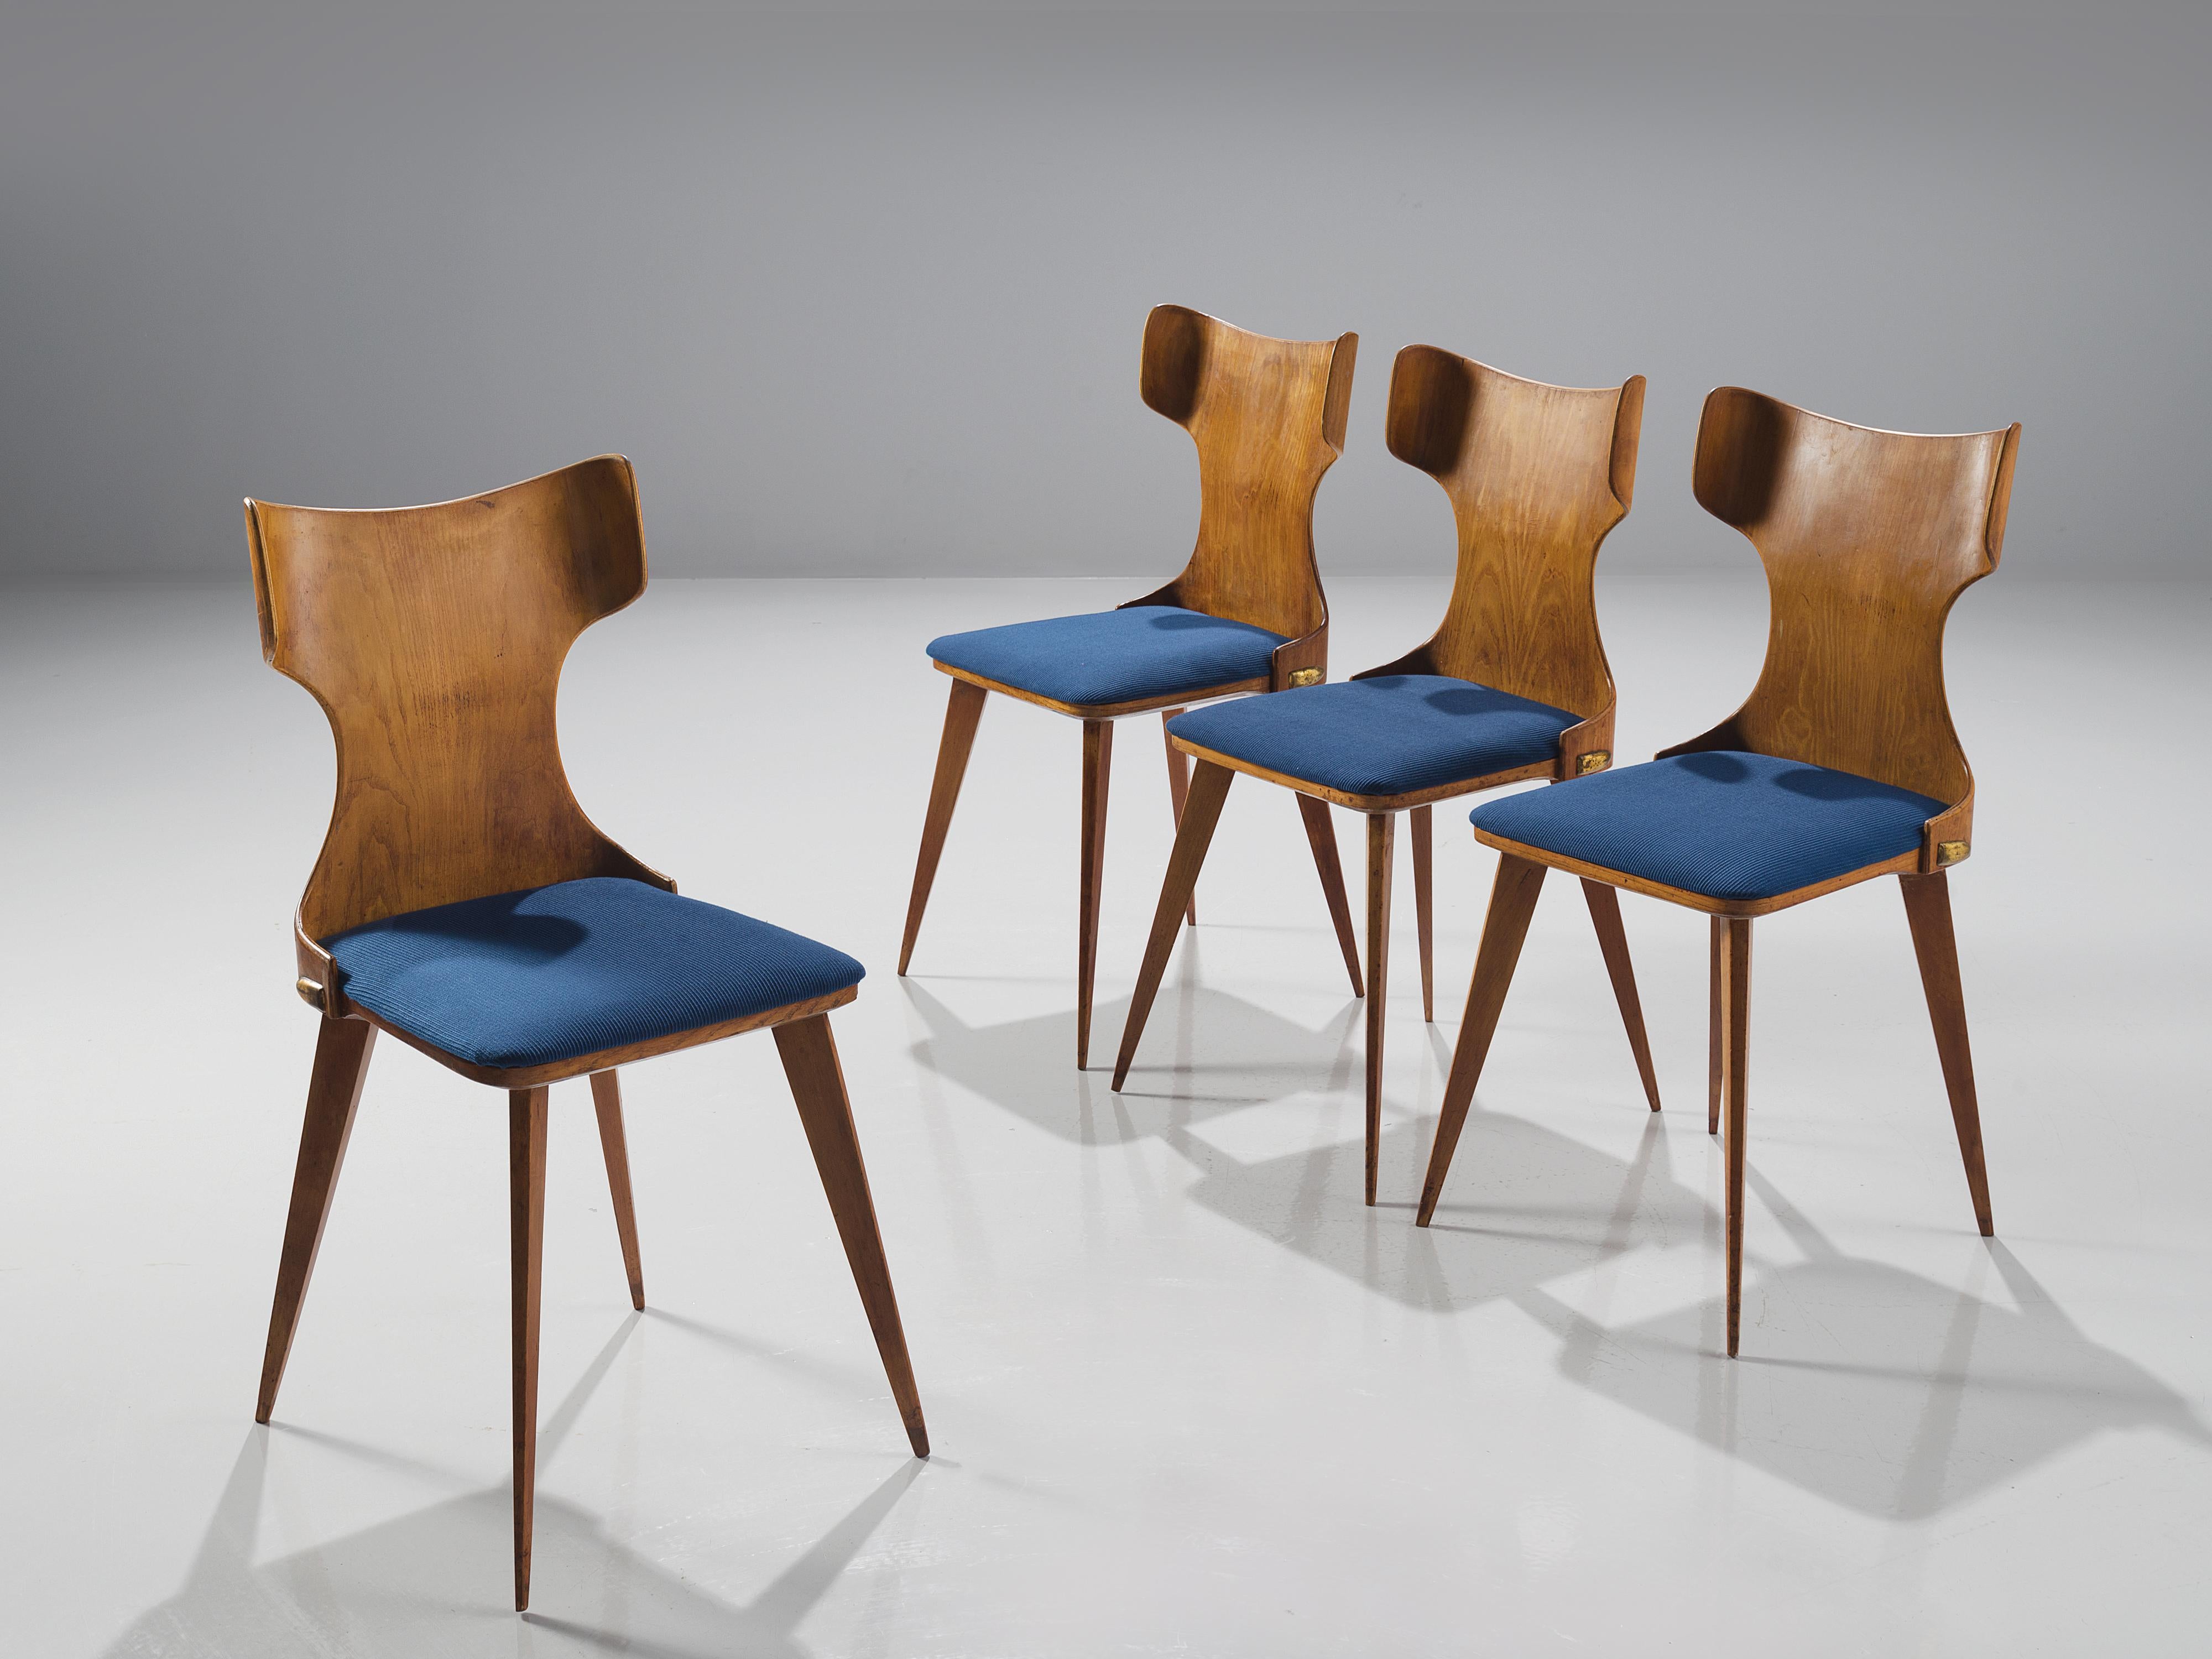 Attributed to Carlo Ratti, set of four dining chairs, bent wood, blue fabric, brass, Italy, 1950s

This Italian set of four dining chairs is part of the midcentury design collection. The set is executed in bent wood with a blue upholstered seat. The